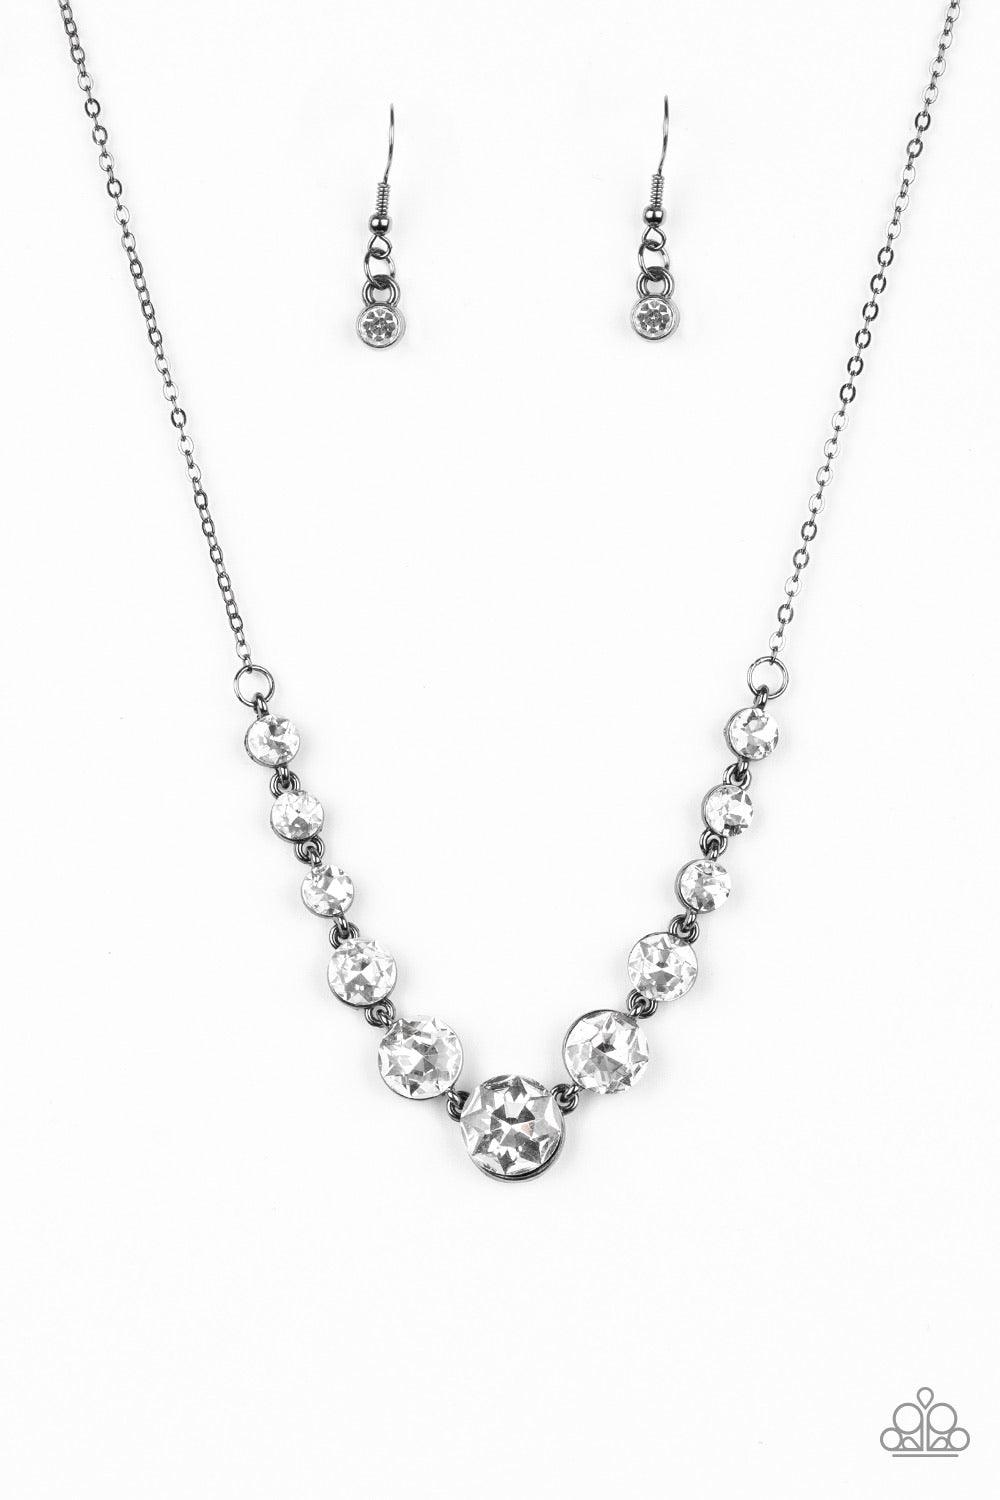 Paparazzi Accessories Leading Socialite - Black Gradually increasing in size near the center, a collection of glassy white rhinestones links below the collar for a timeless look. Features an adjustable clasp closure. Sold as one individual necklace. Inclu